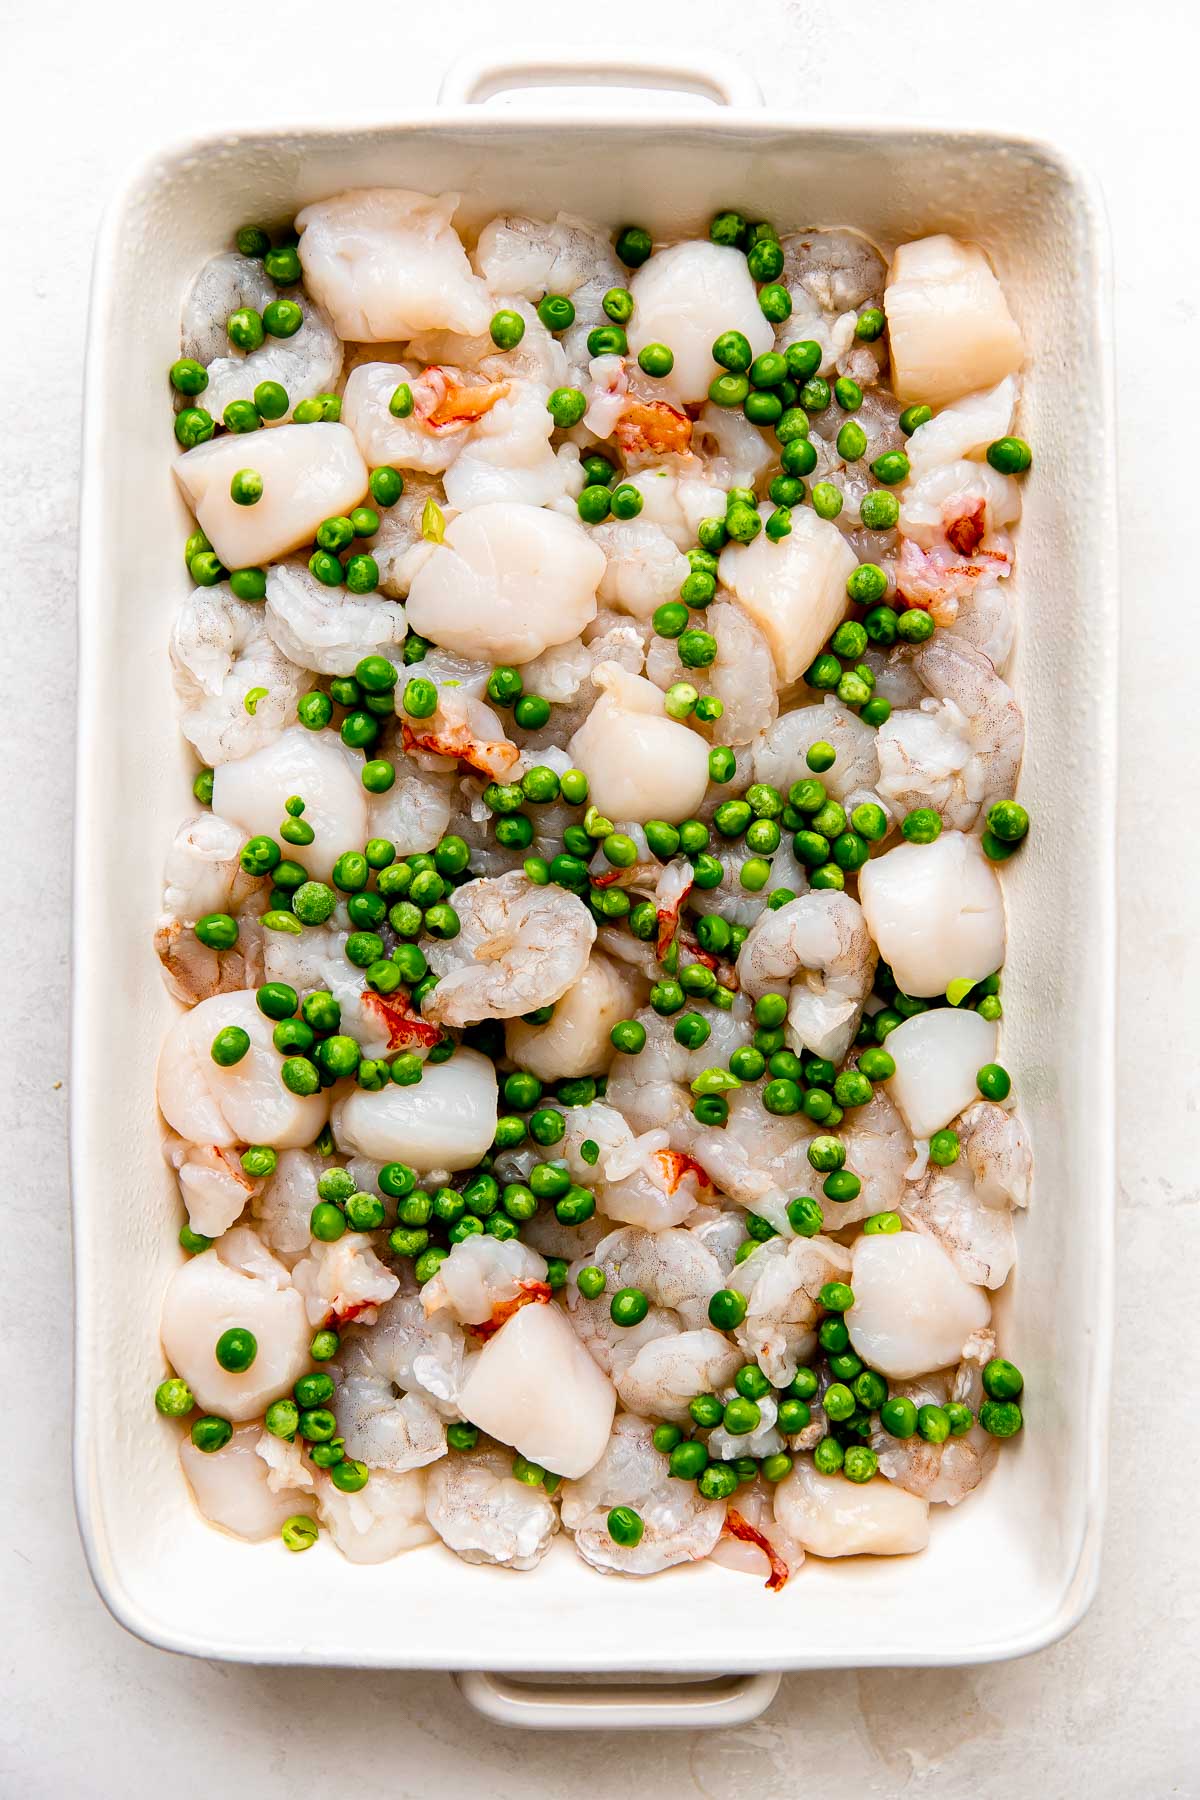 A layer of scallops, shrimp, lobster, & peas fills a white oven-safe baking dish that sits atop a creamy white textured surface. This is the first layer of a partially assembled seafood pot pie.